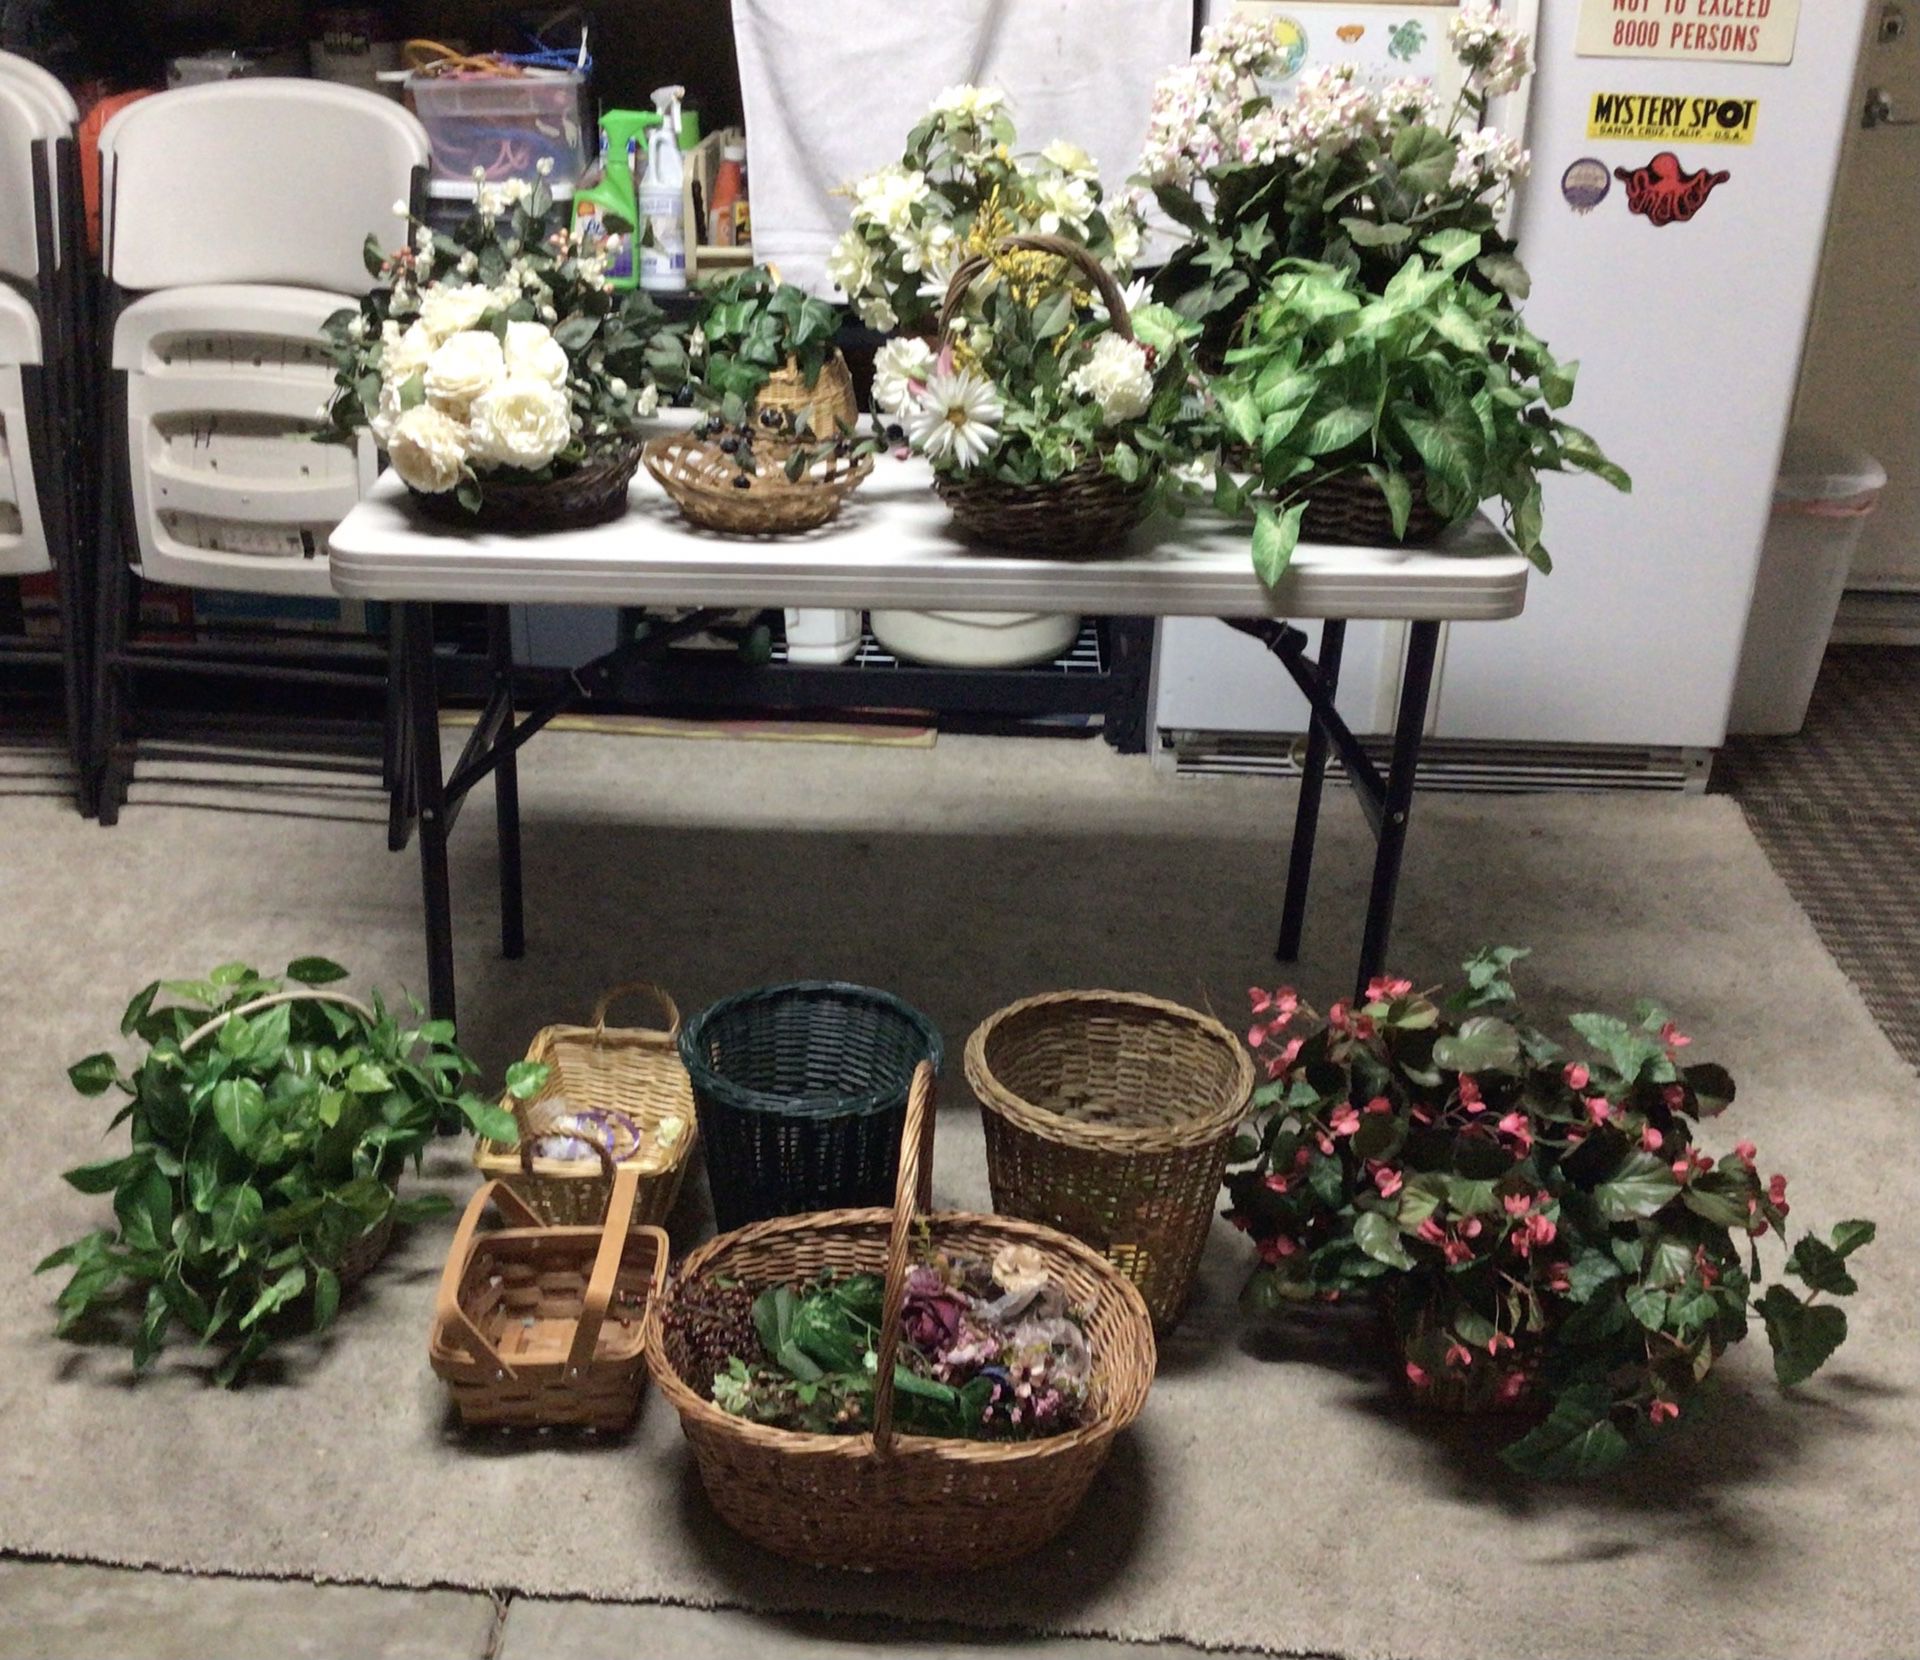 Baskets And Fake Flowers … $3 - $10 Each 